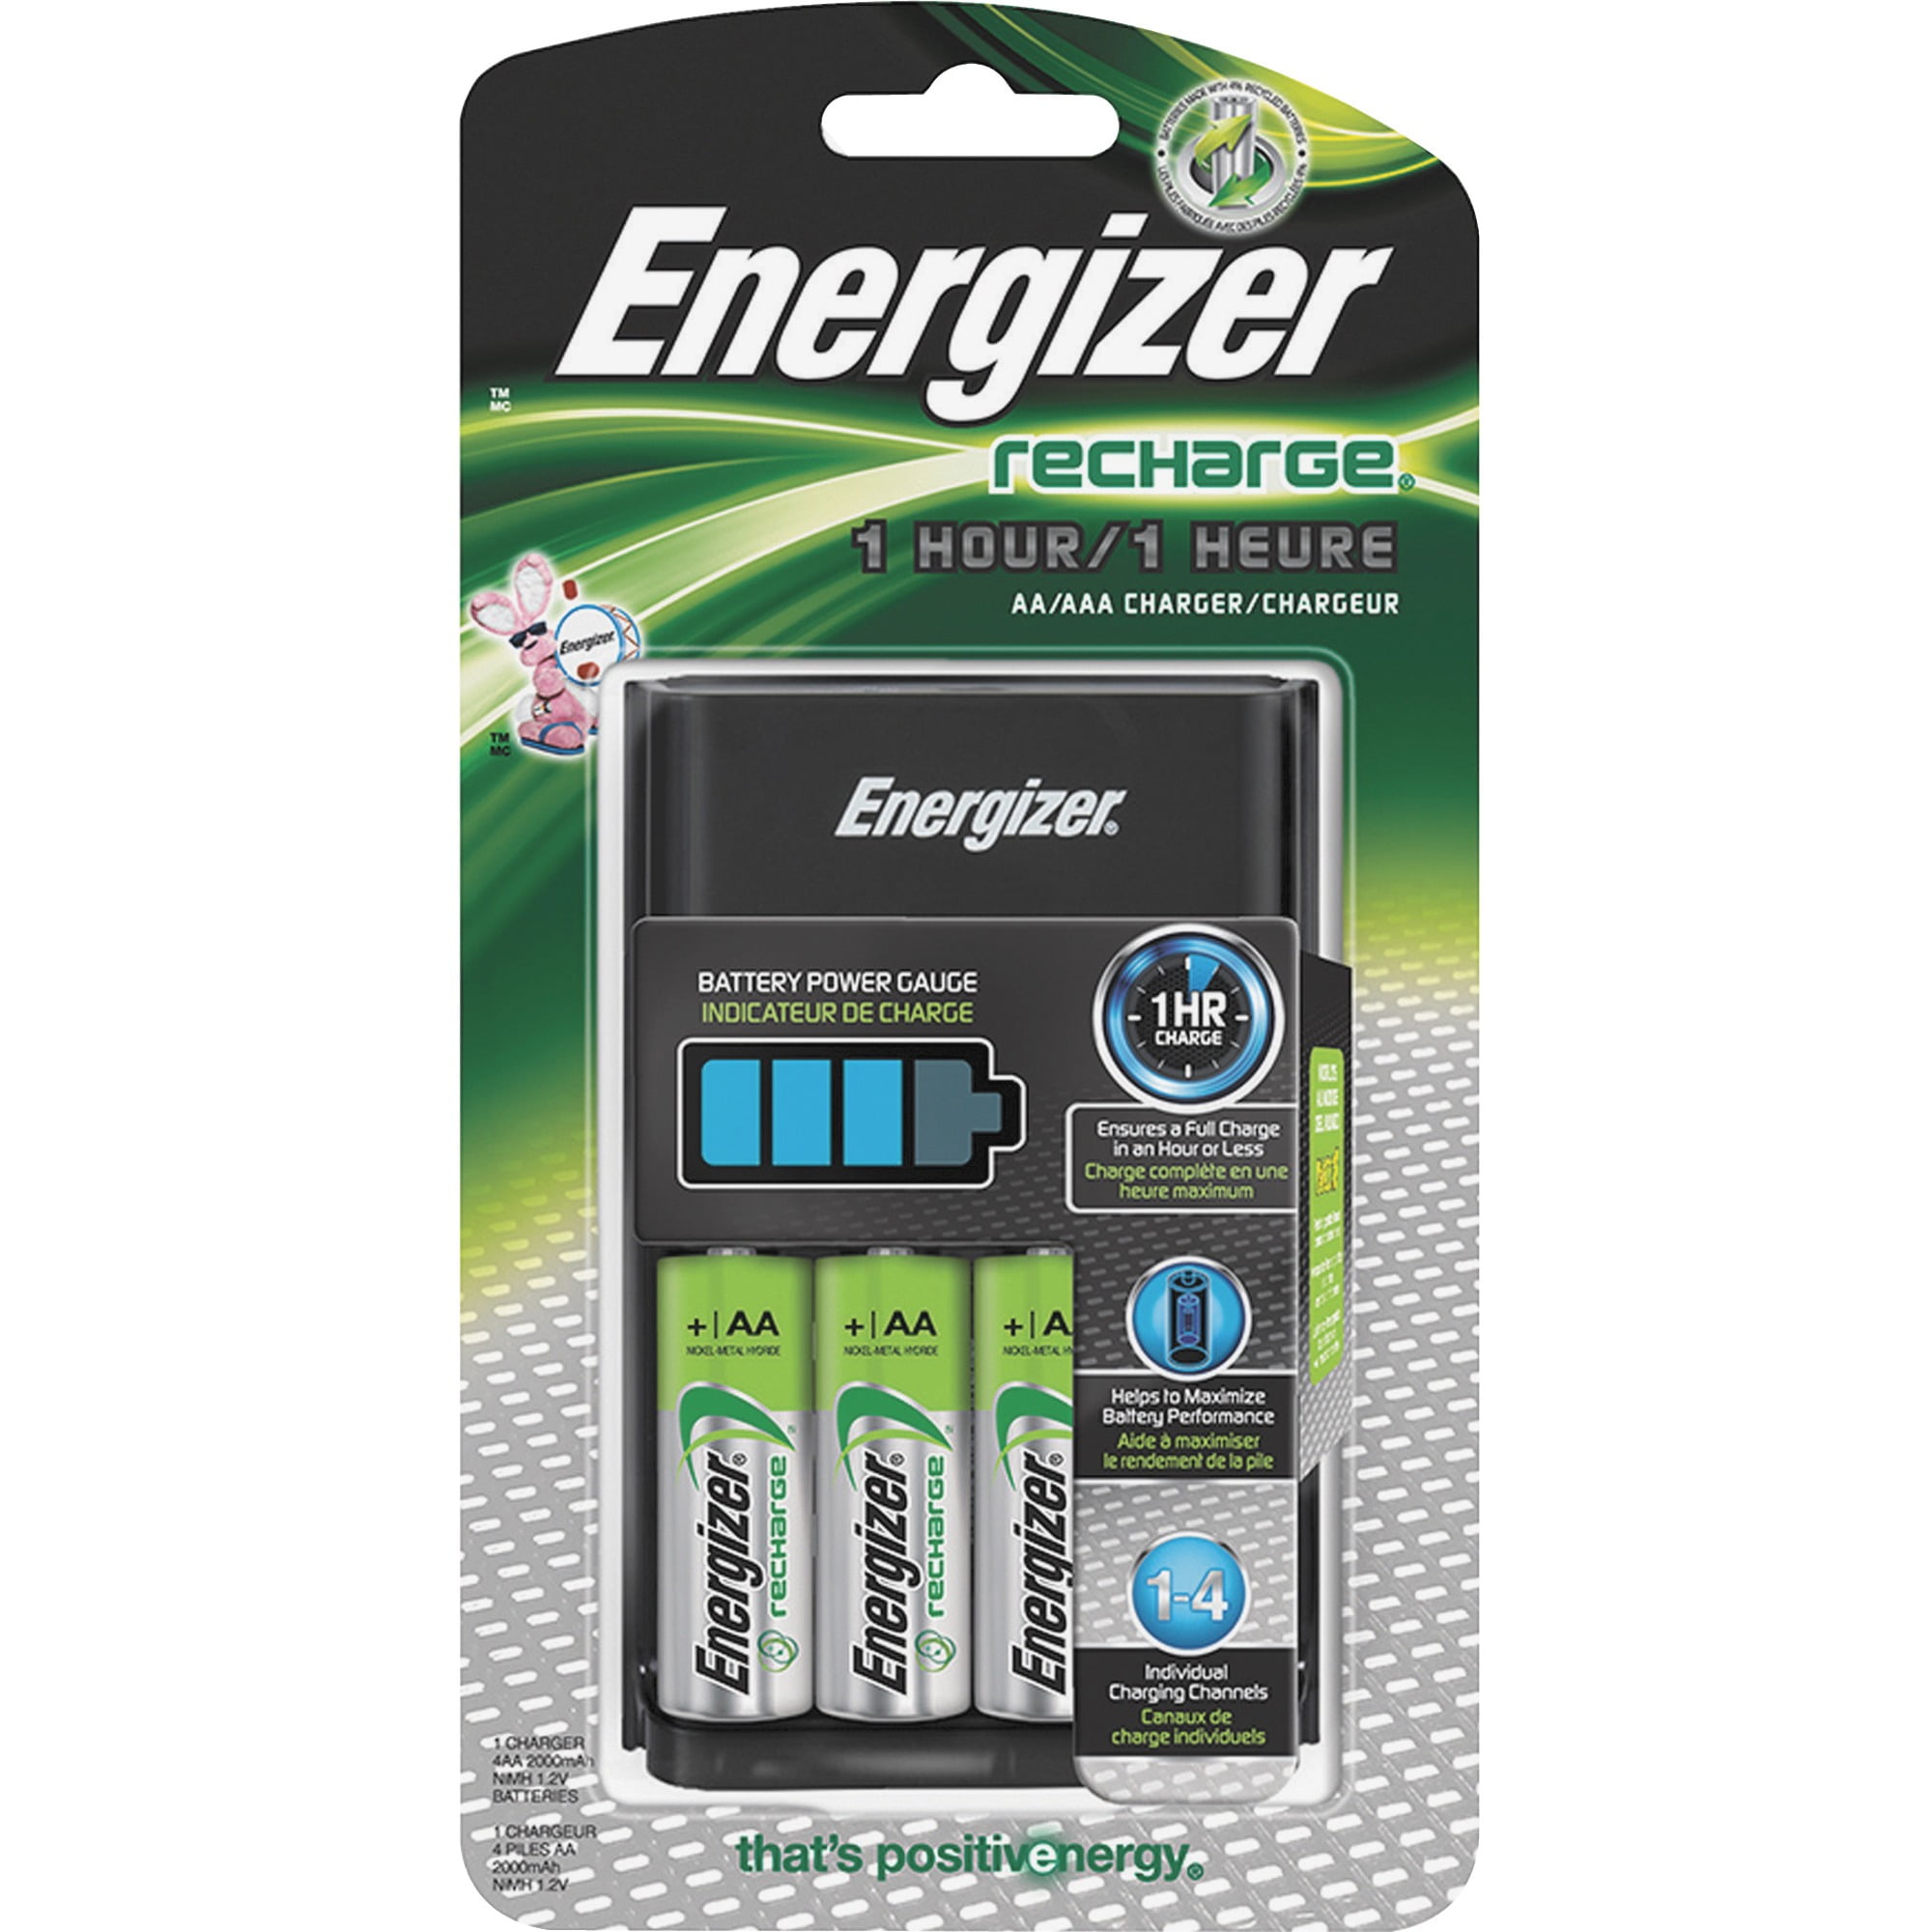 Energizer Chargeur pour piles rechargeables AA et AAA (Recharge